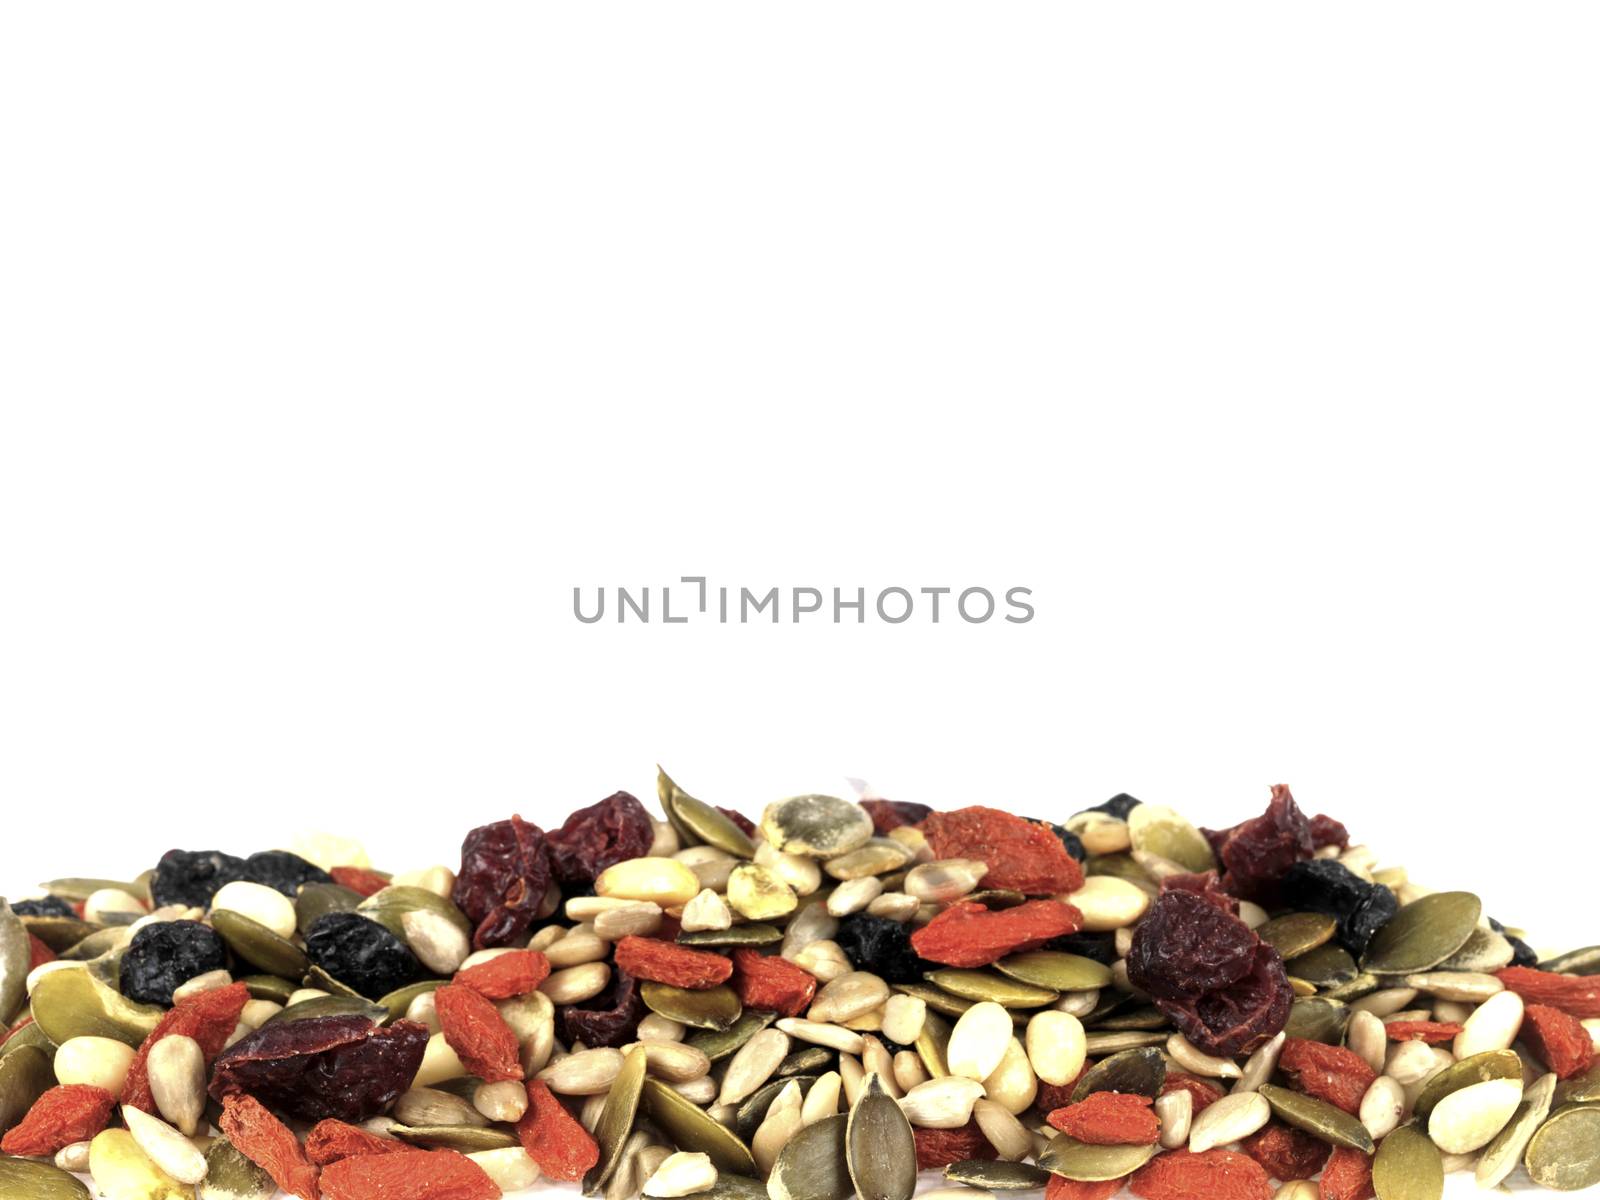 Mixed Berries and Seeds